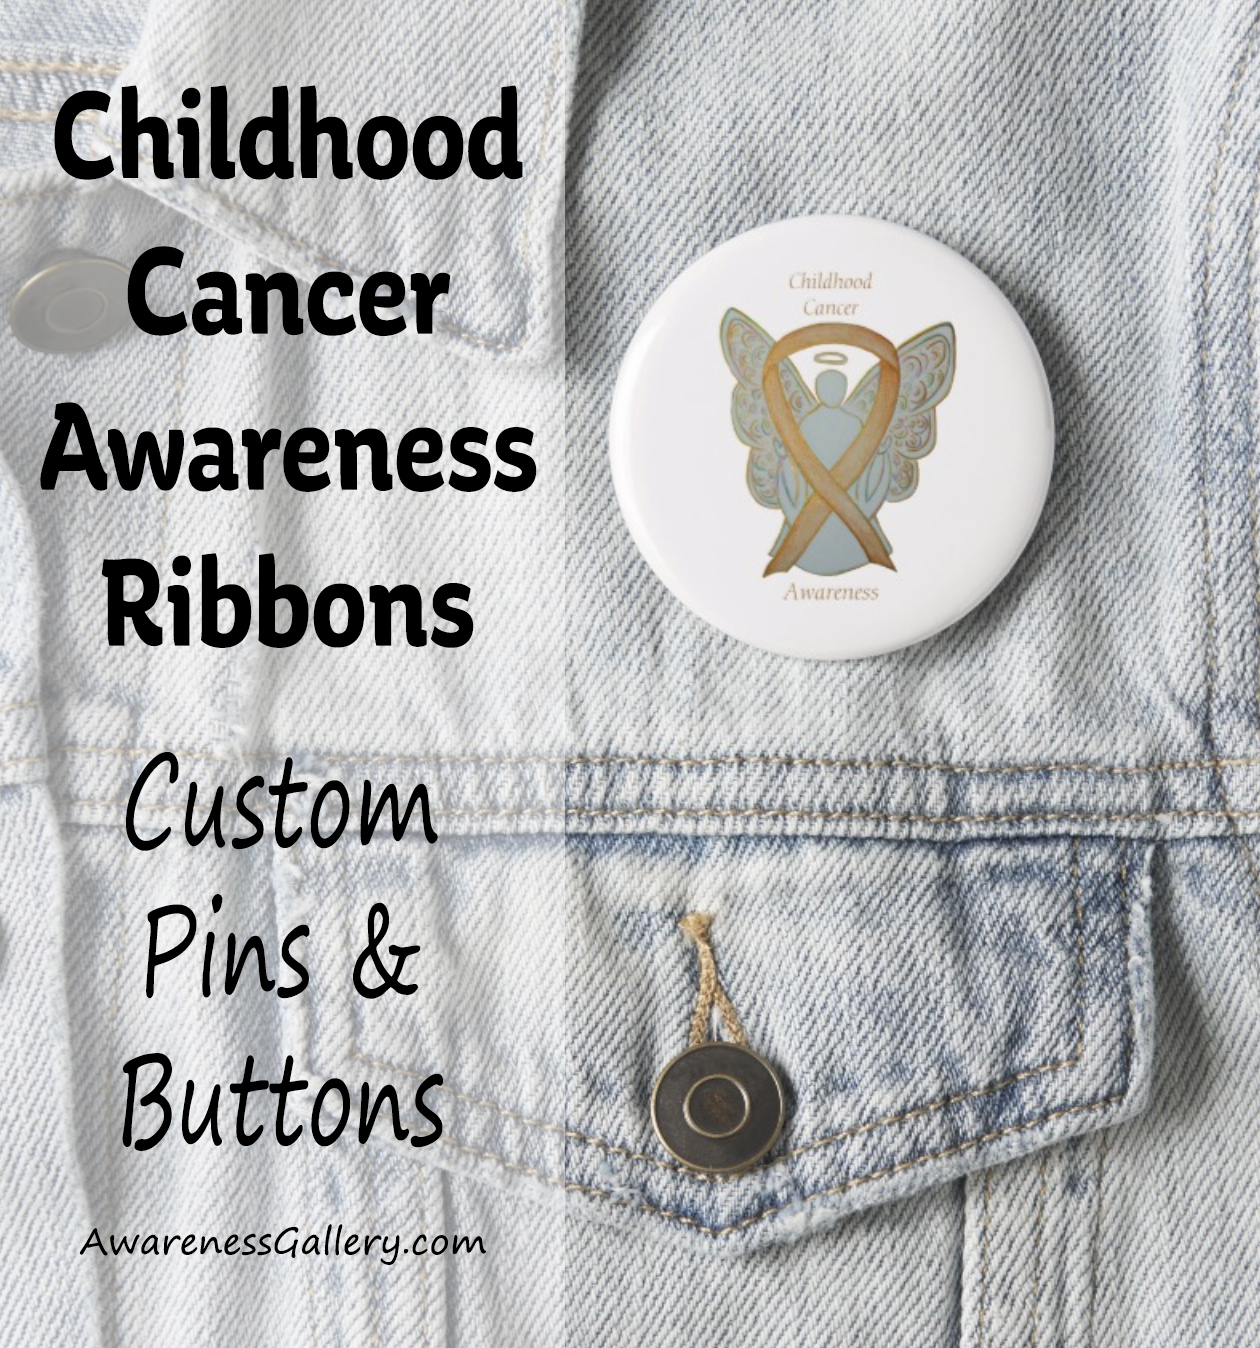 Personalized Pediatric Cancer Awareness Ribbon Pin and Button Art Photo